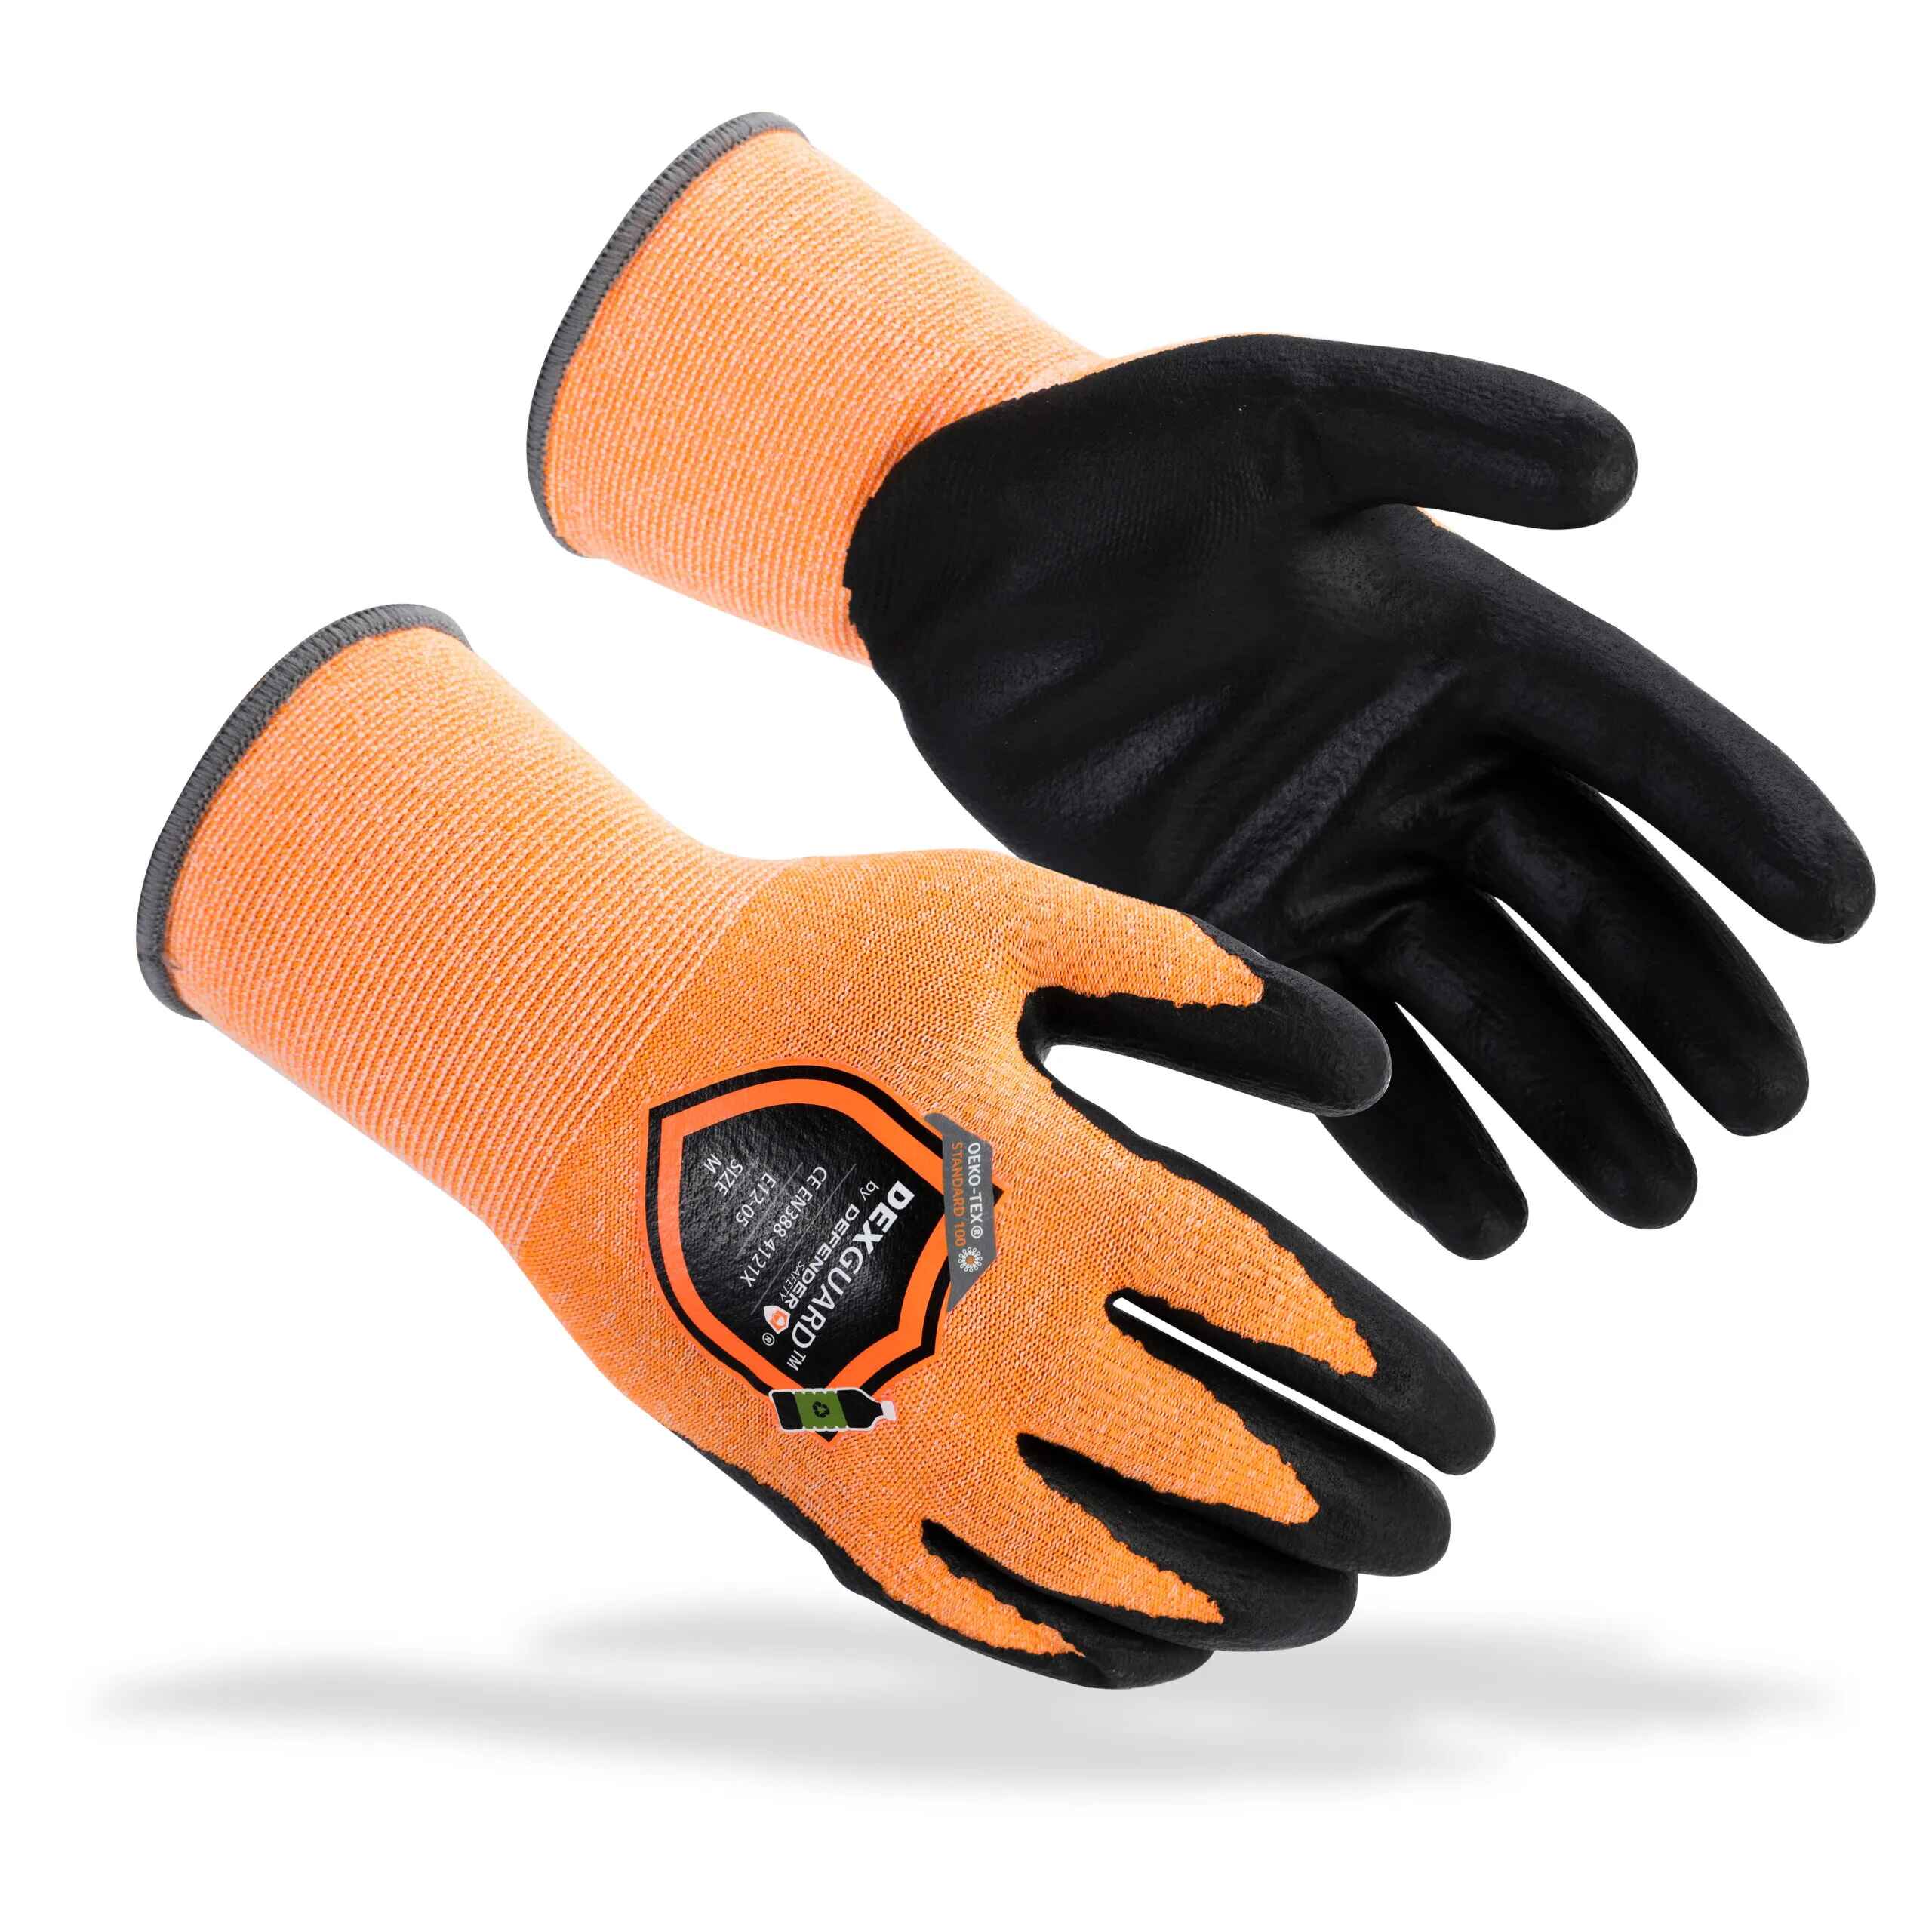 https://defendersafety.com/cdn/shop/products/dexguard-general-purpose-recycled-gloves-touch-screen-compatible-abrasion-resistant-level-4-foam-nitrile-coating-783899.jpg?v=1690825175&width=2560